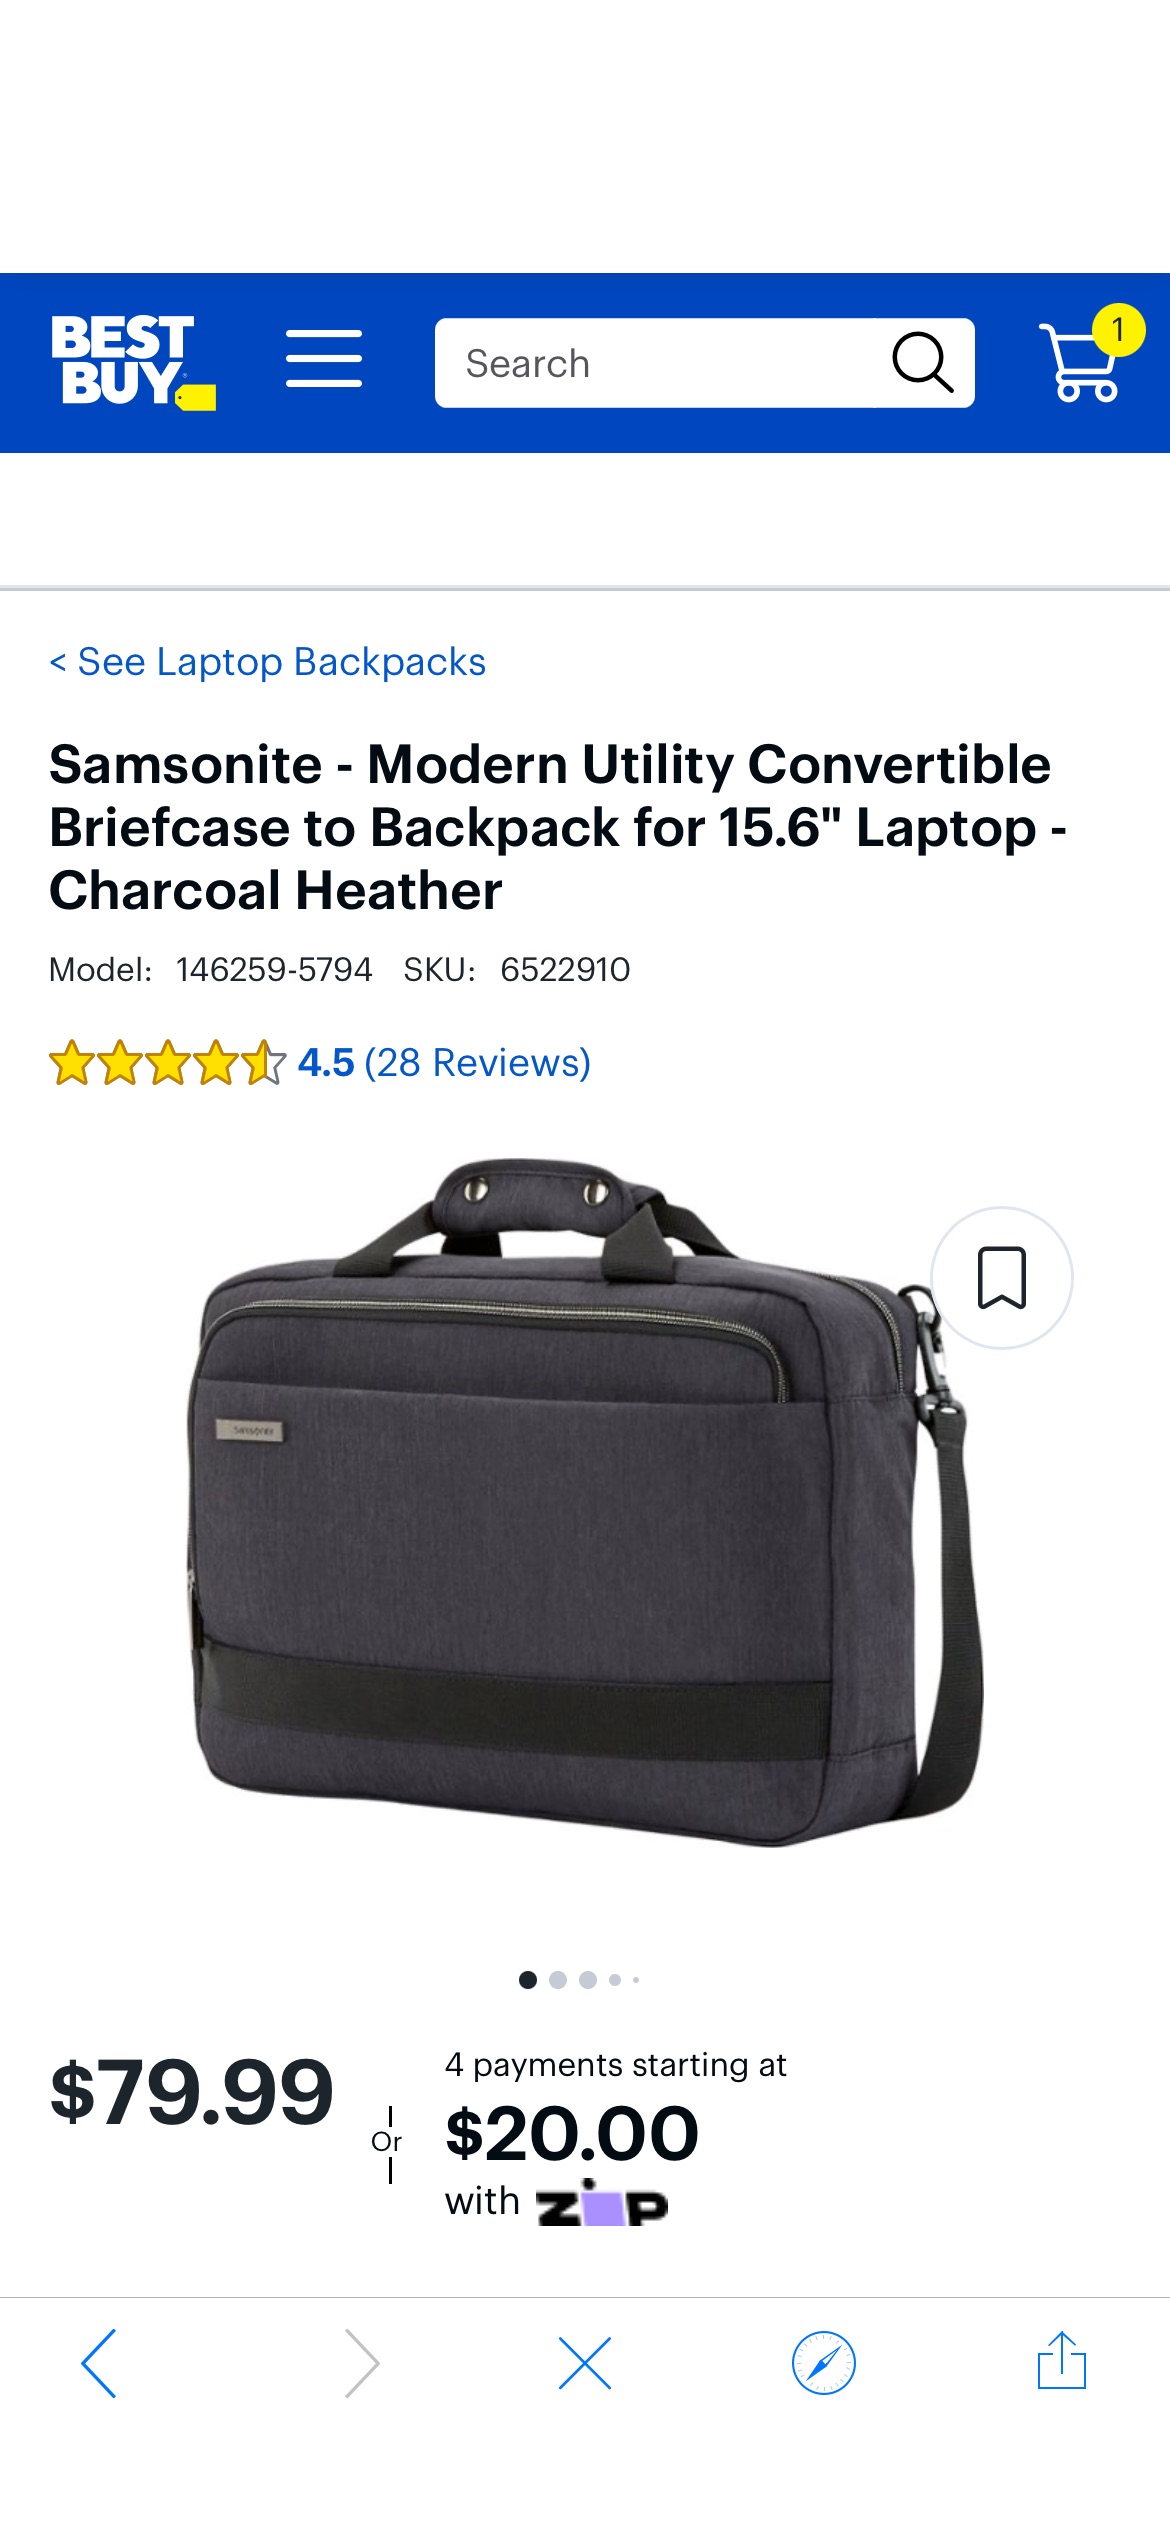 Samsonite Modern Utility Convertible Briefcase to Backpack for 15.6" Laptop Charcoal Heather 146259-5794 - Best Buy